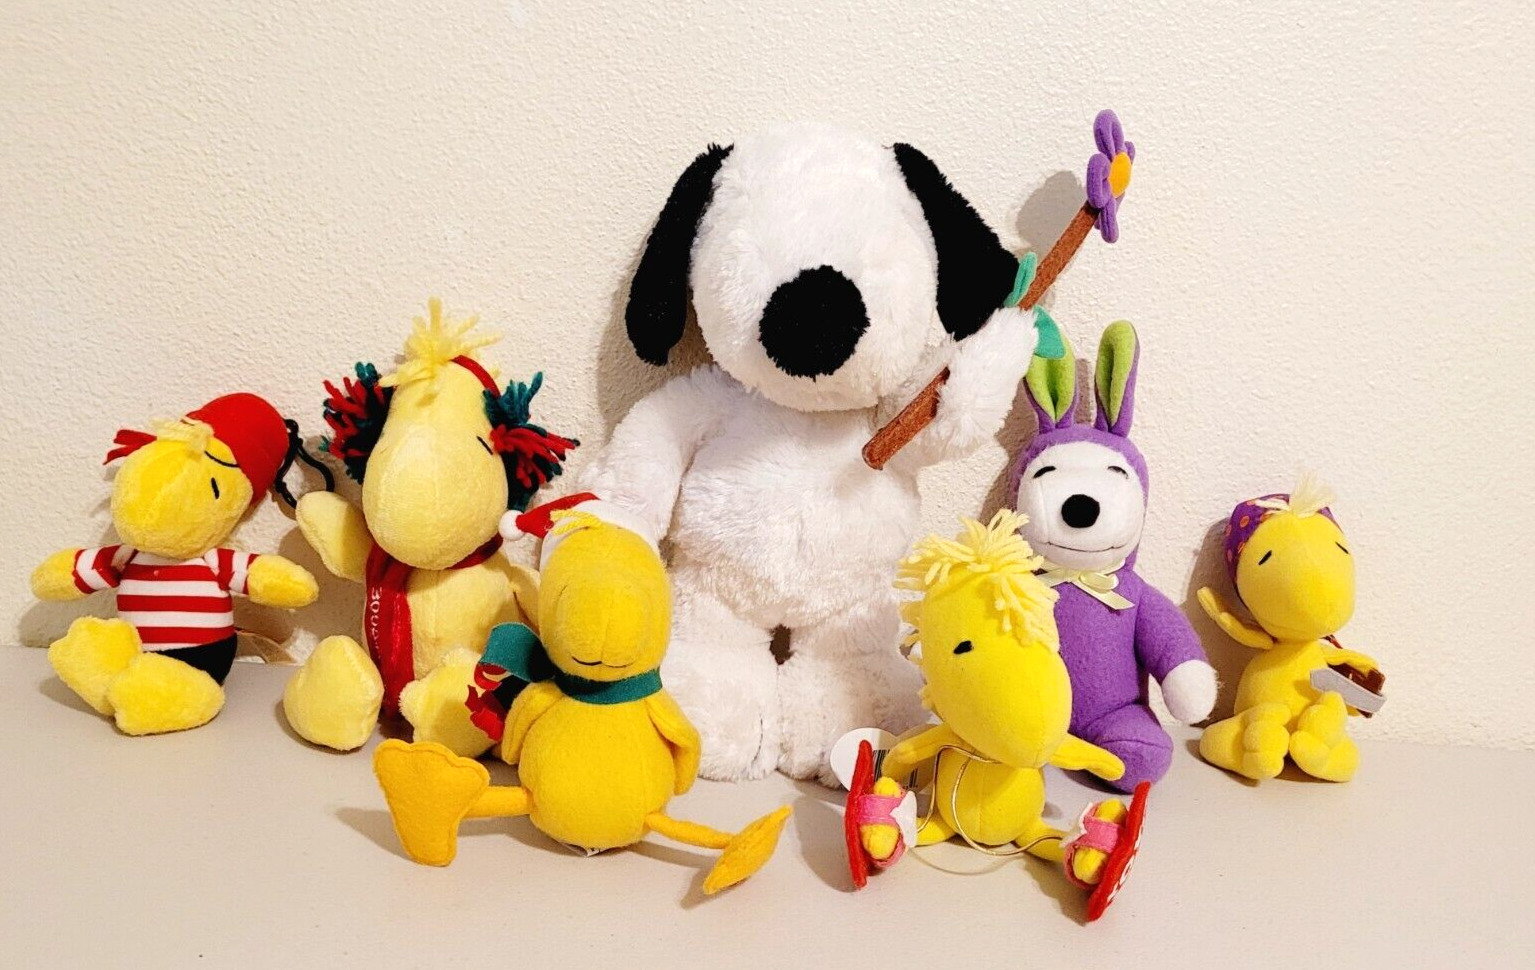 7 Piece Lot Peanuts SNOOPY and WOODSTOCK Christmas Easter Pirate Stuffed Plush